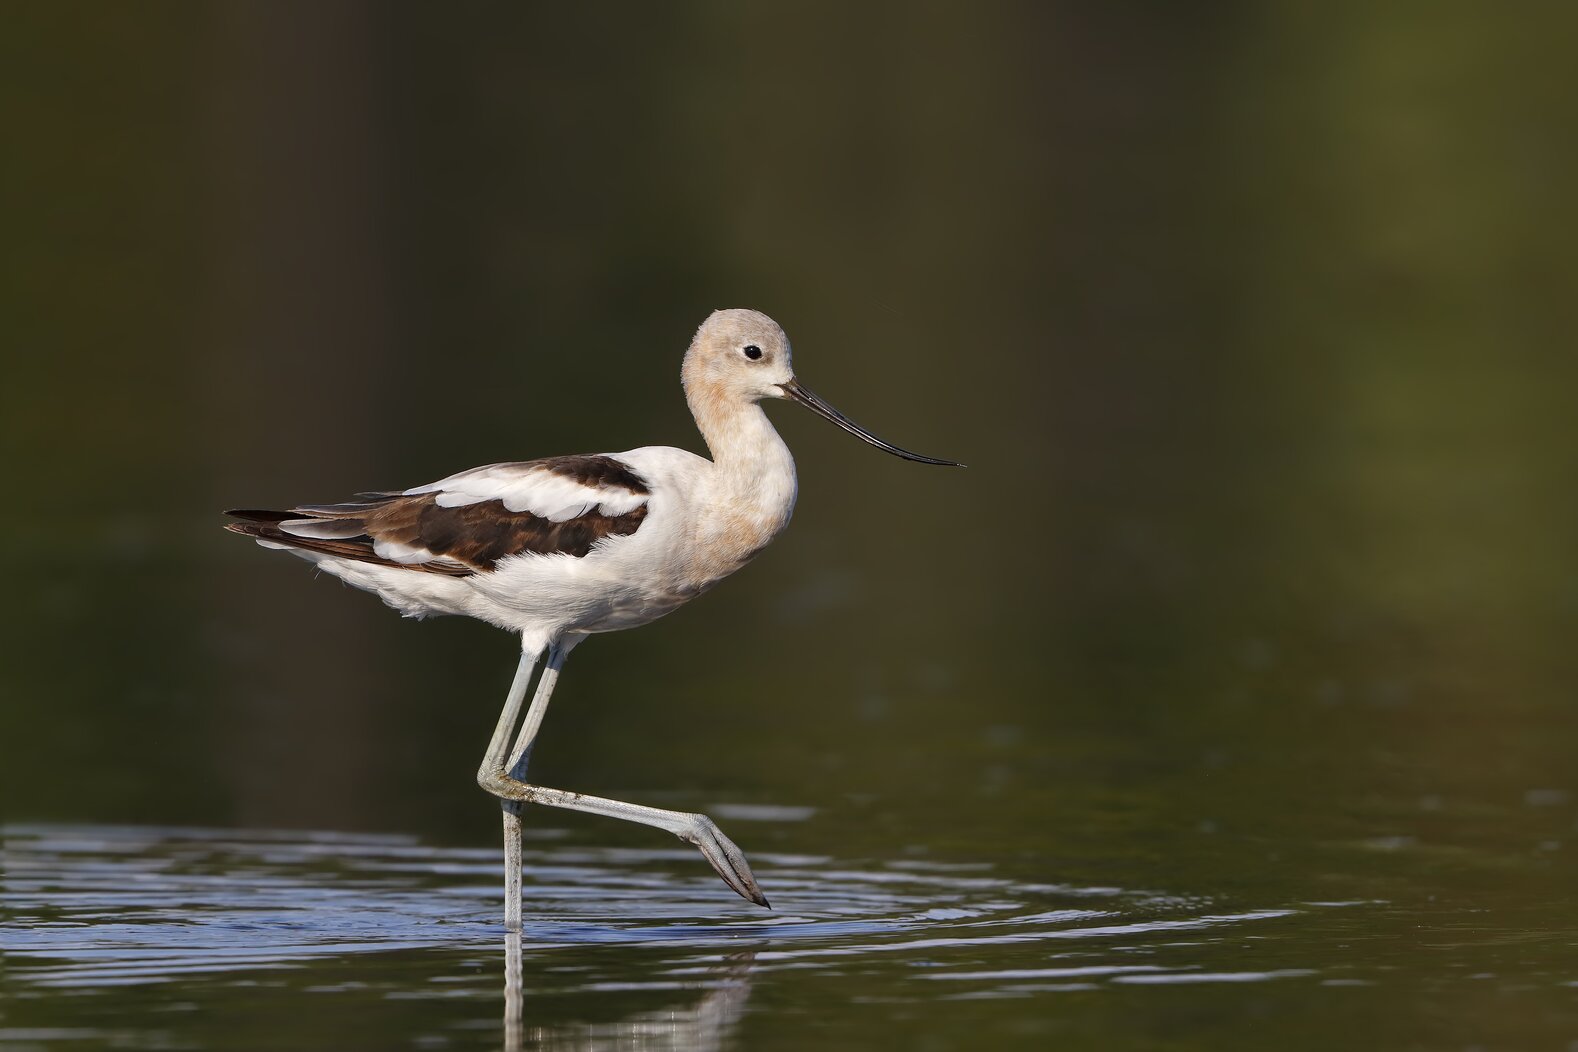 This first Avocet to be documented on Staten Island was seen at Goethals Pond in August 2017. Photo: Isaac Grant